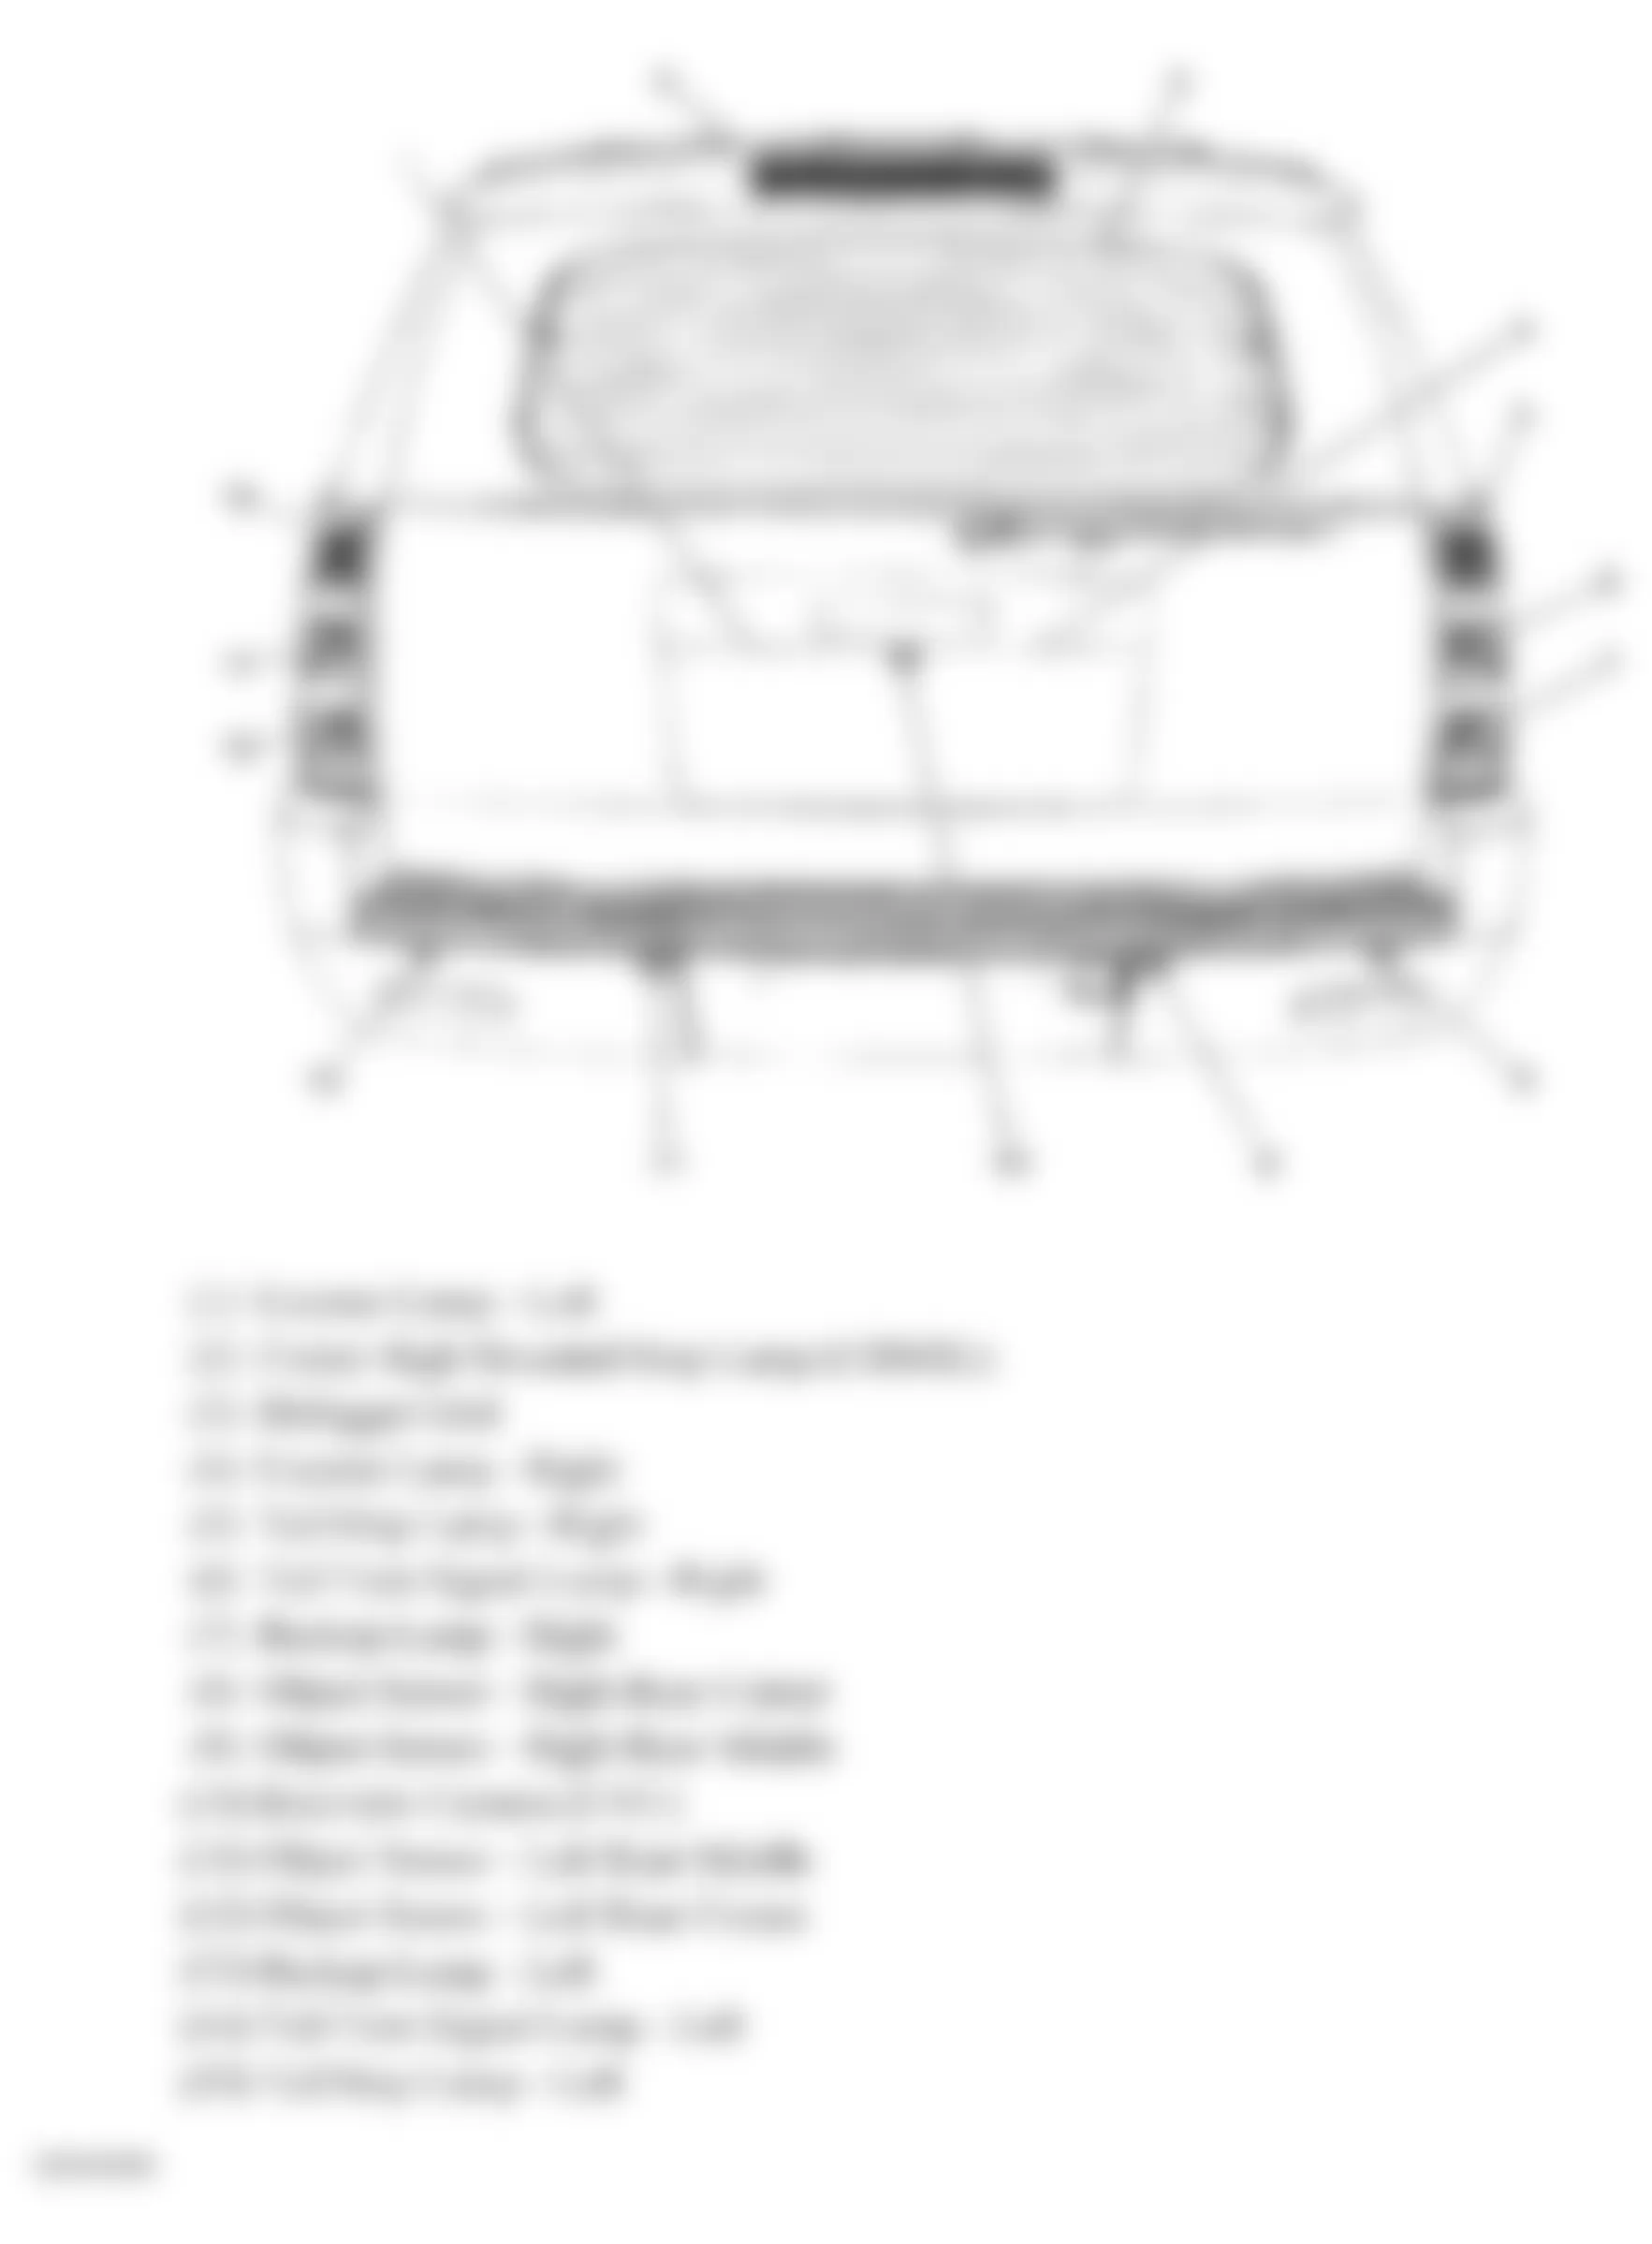 Chevrolet Suburban C1500 2009 - Component Locations -  Rear Of Vehicle (Yukon W/One Piece Liftgate)